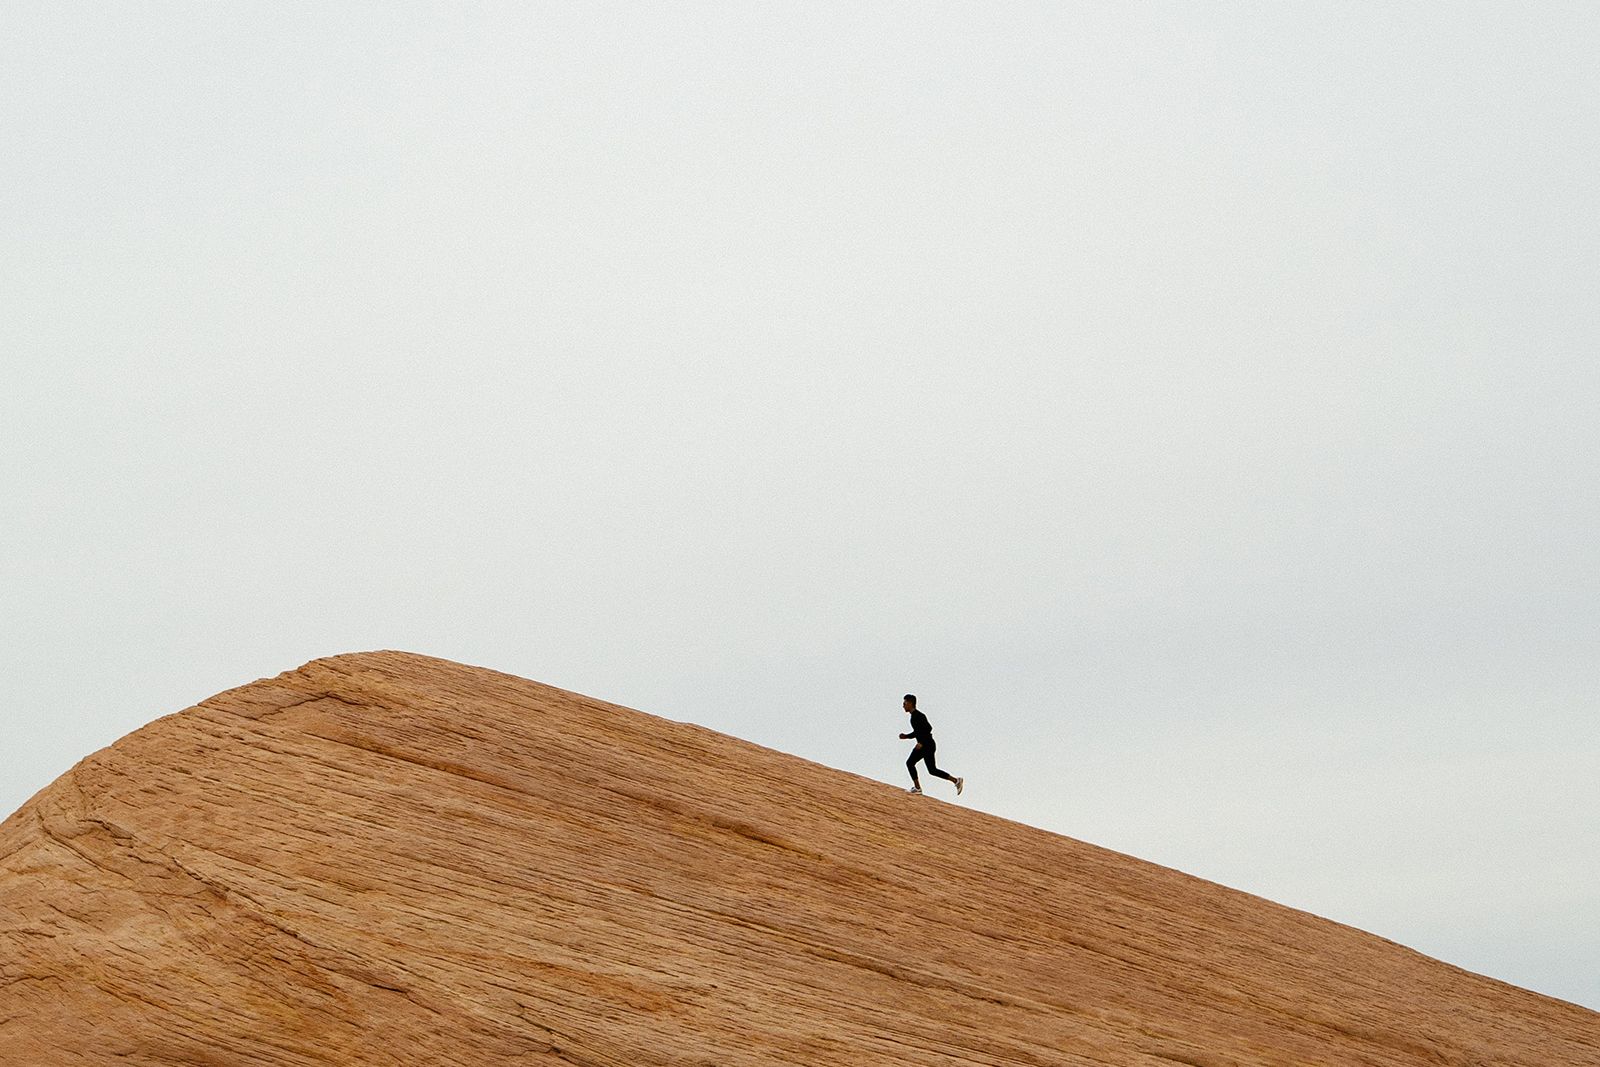 A person runs up a red rock formation against a grey sky.